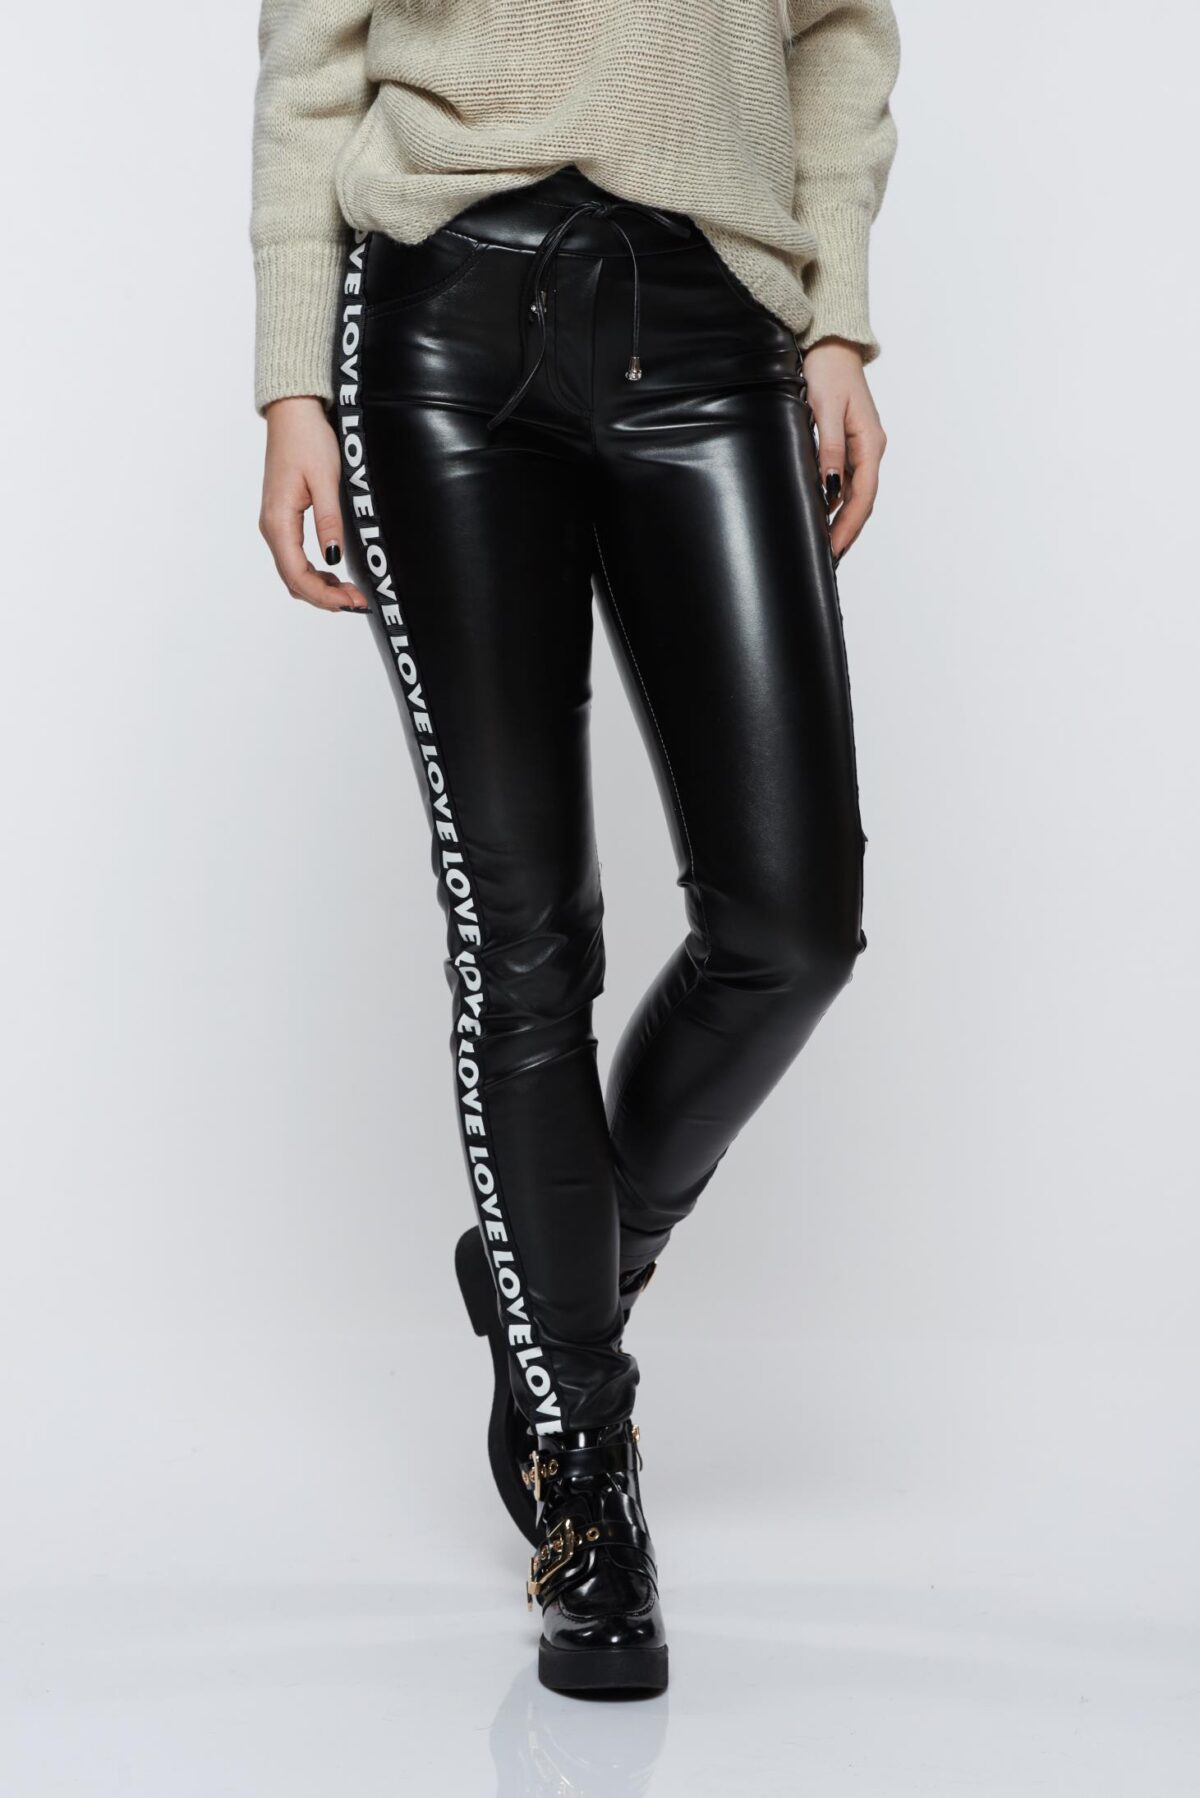 Black Trousers Casual With Medium Waist Of Ecological Leather